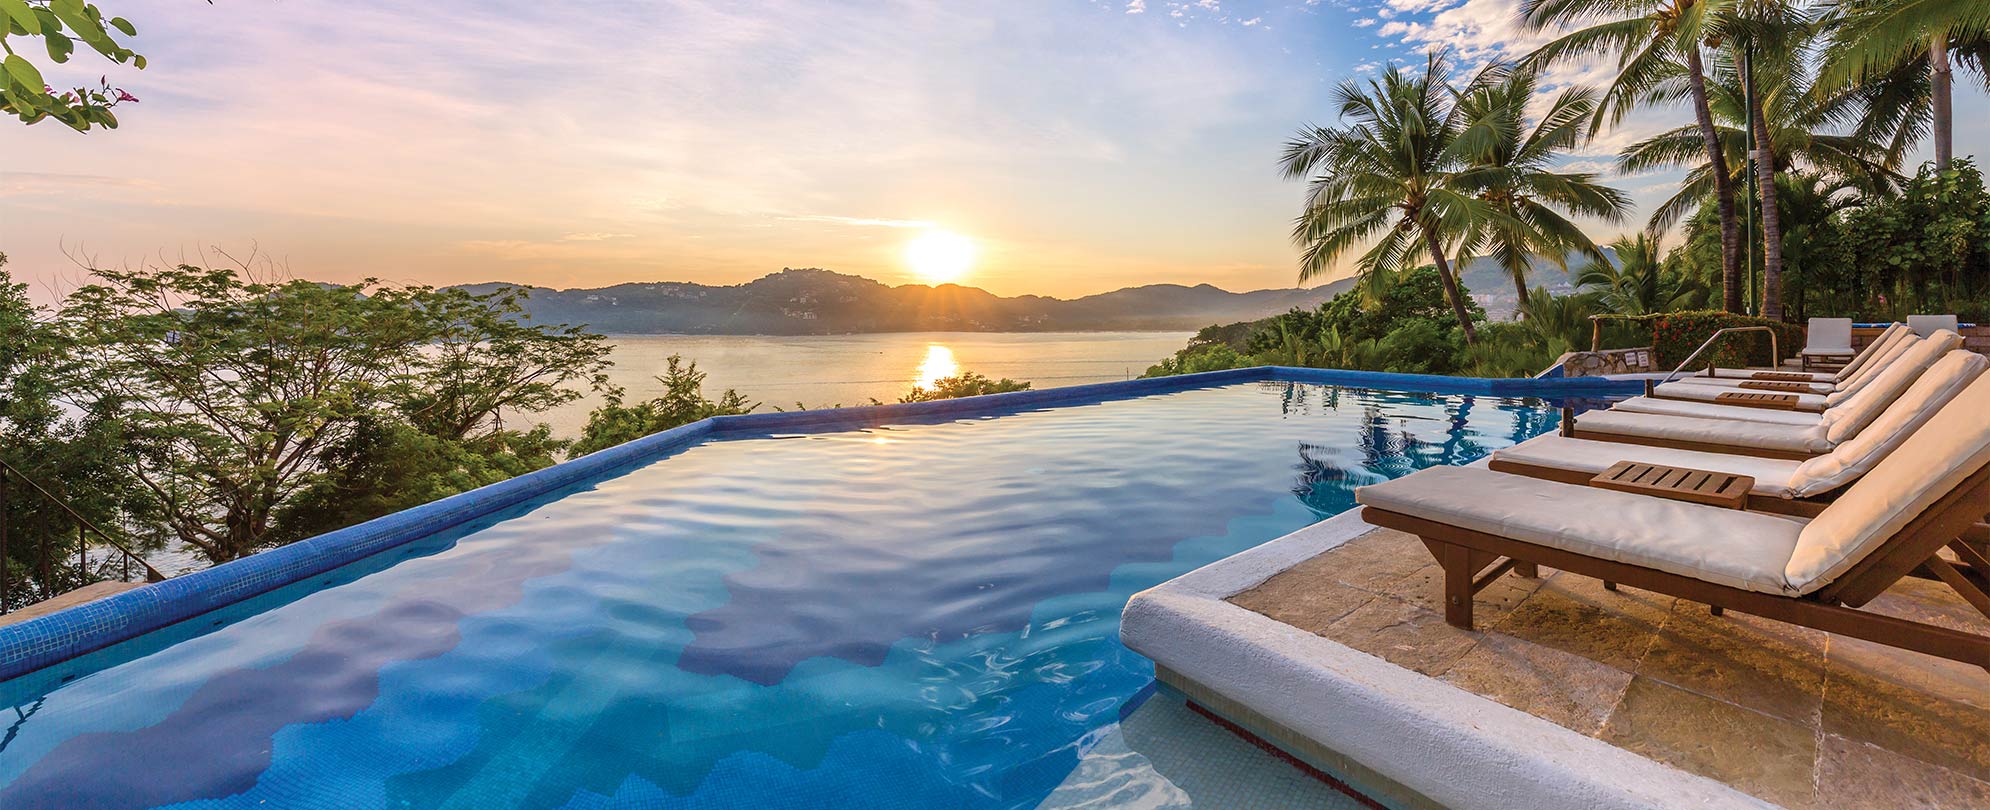 Oceanfront pool surrounding by palm trees and lounge chairs at WorldMark Zihuatanejo in Mexico.